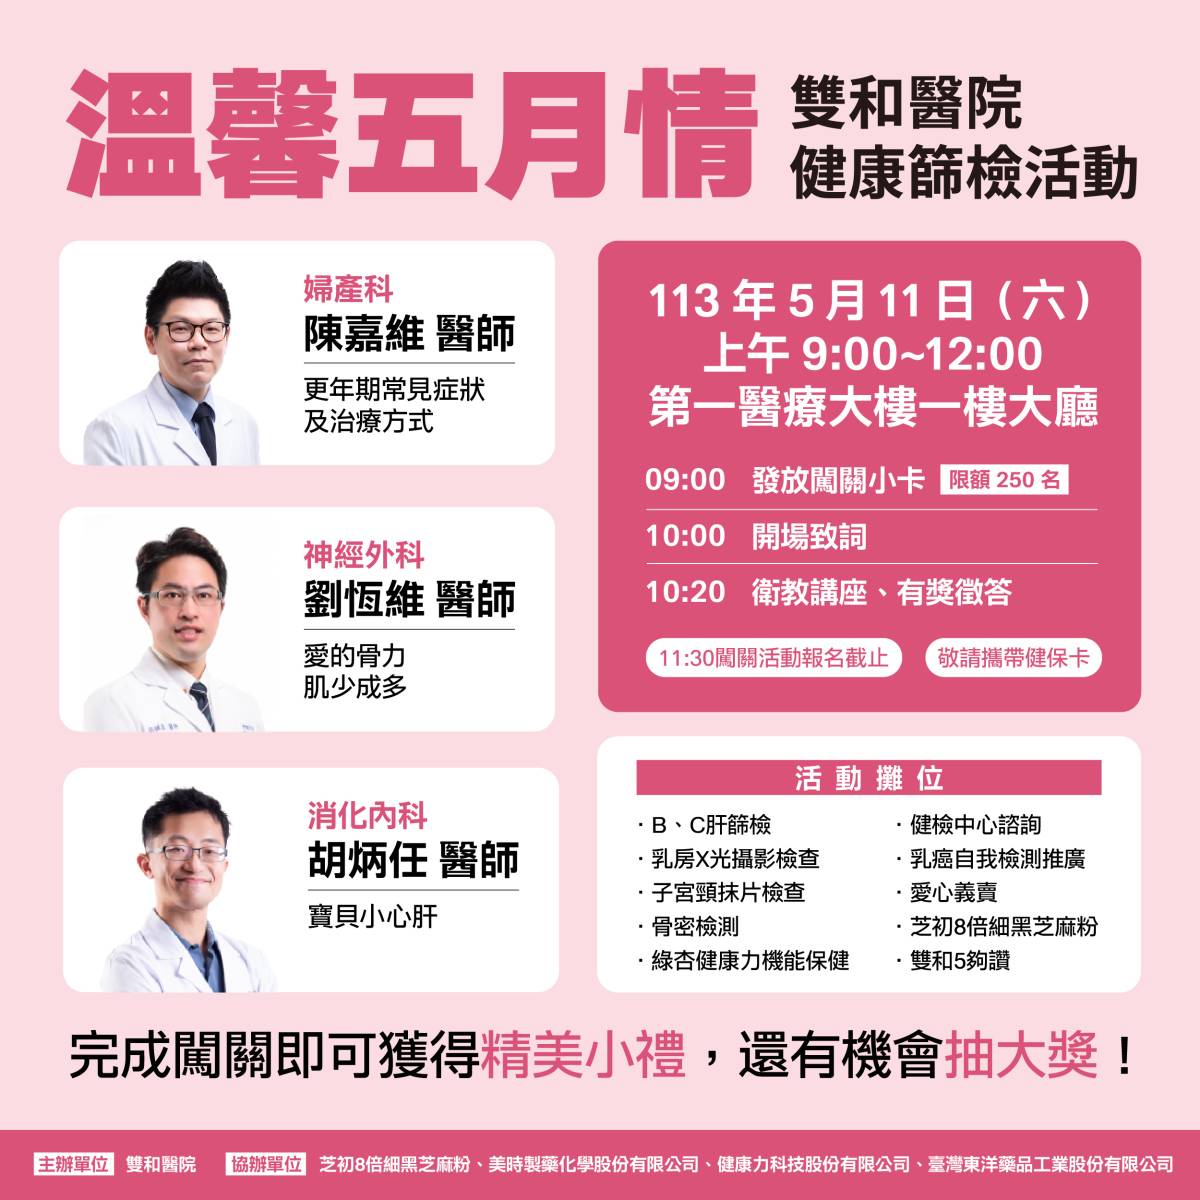 Shuanghe Hospital Hosts ‘Warm May Love’ Women’s Health Event on May 11